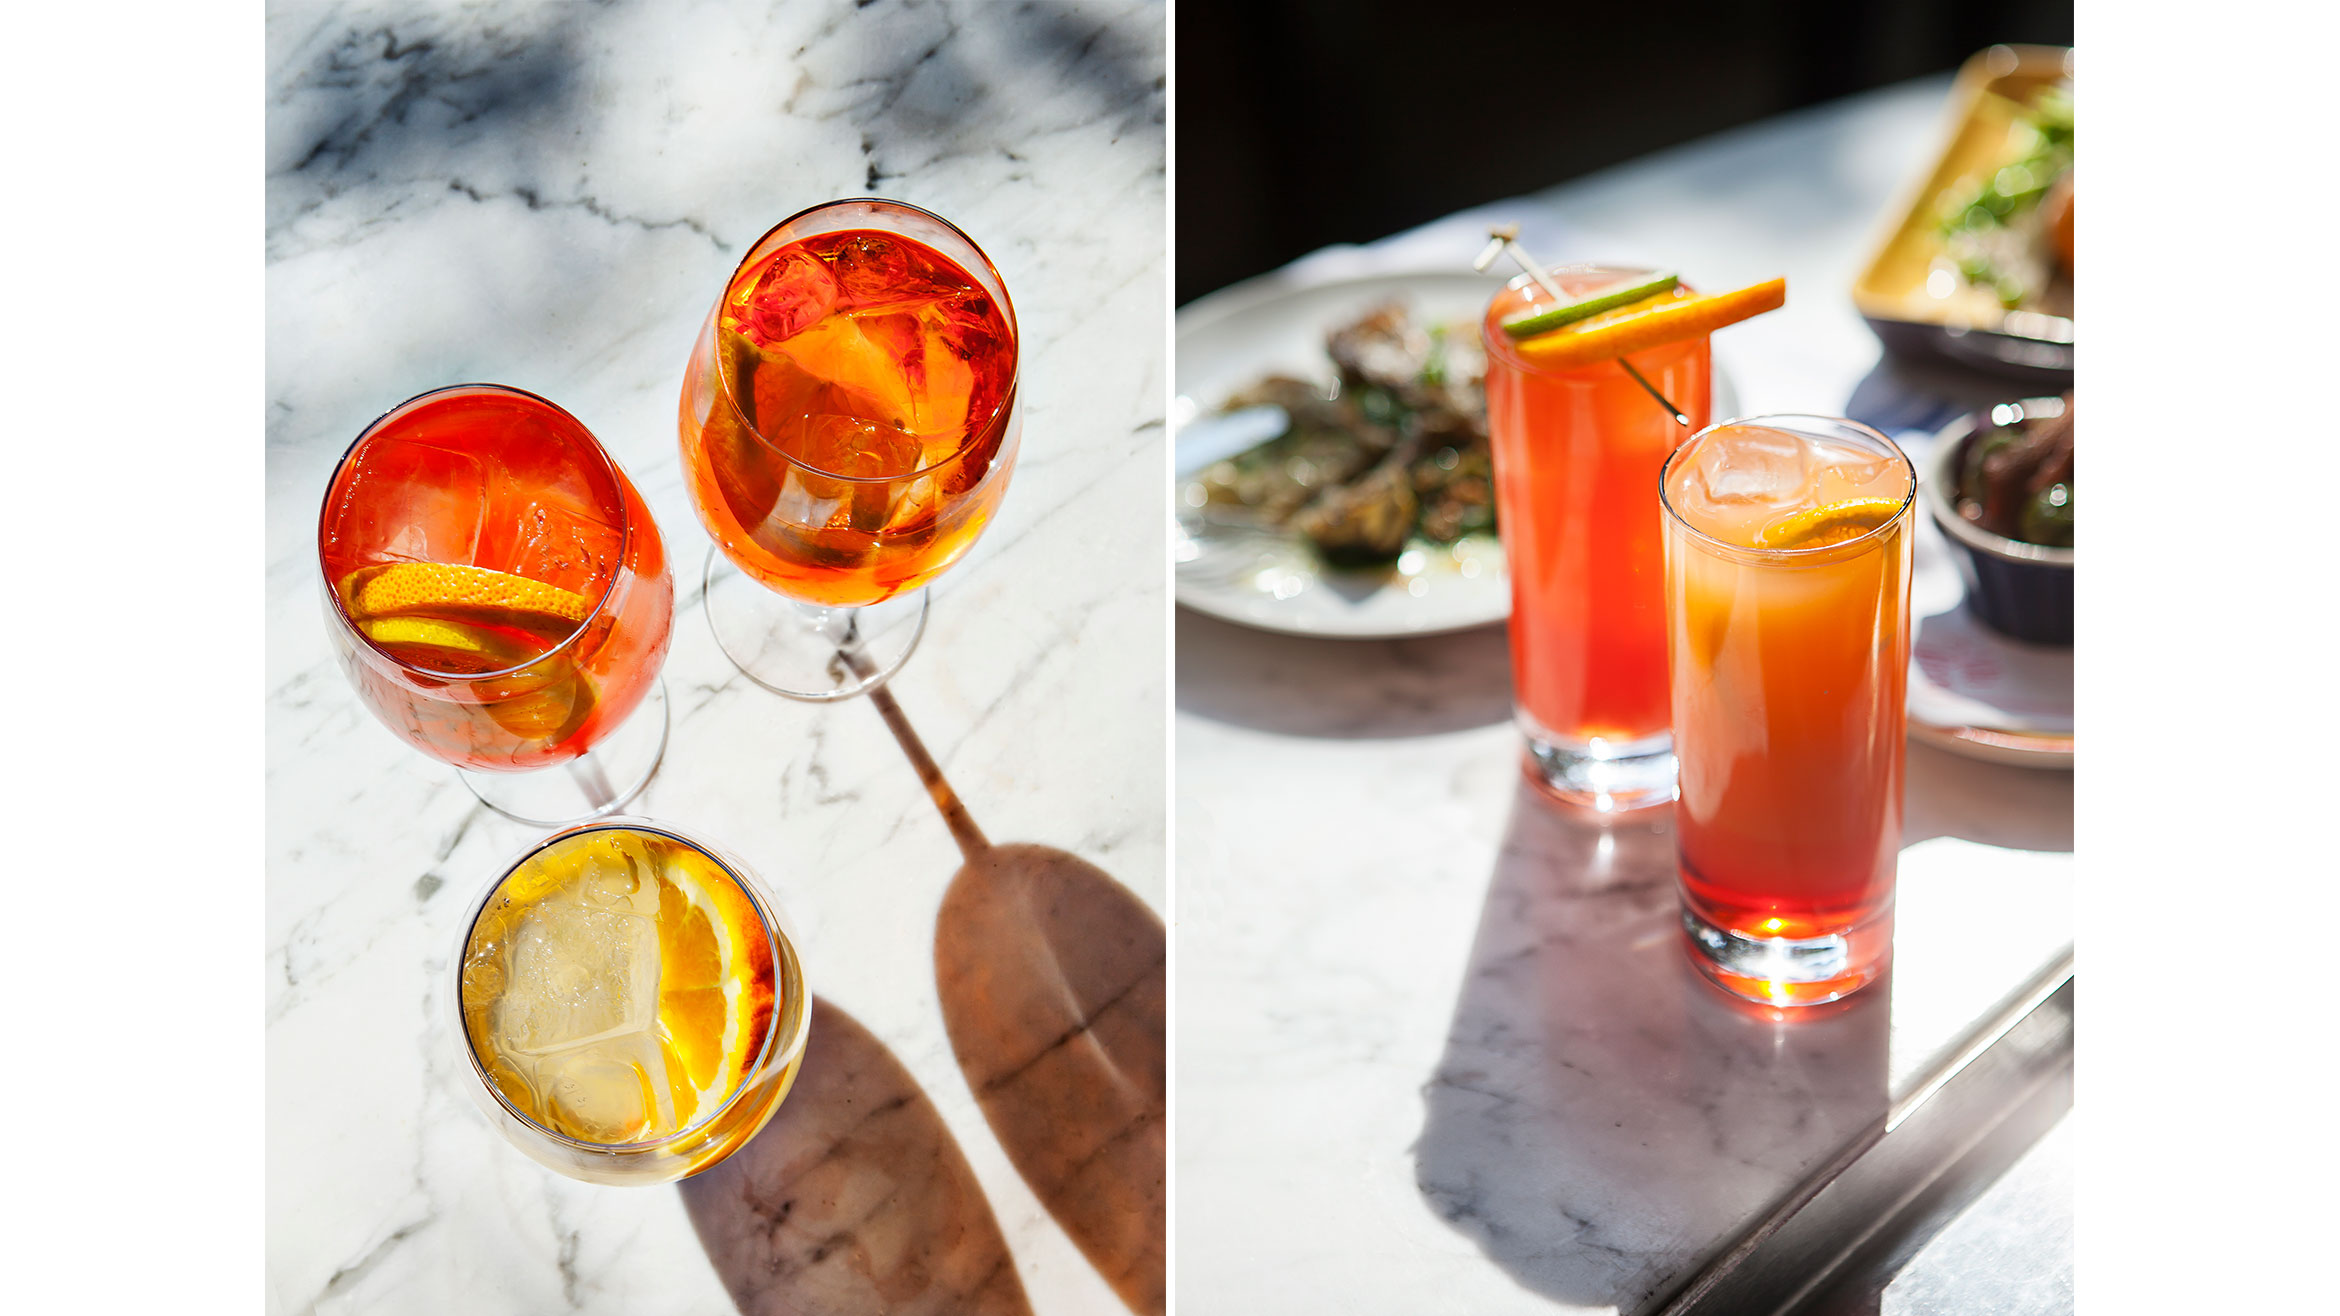 PUNCH | Italian Aperitivo Finds Its Footing in America